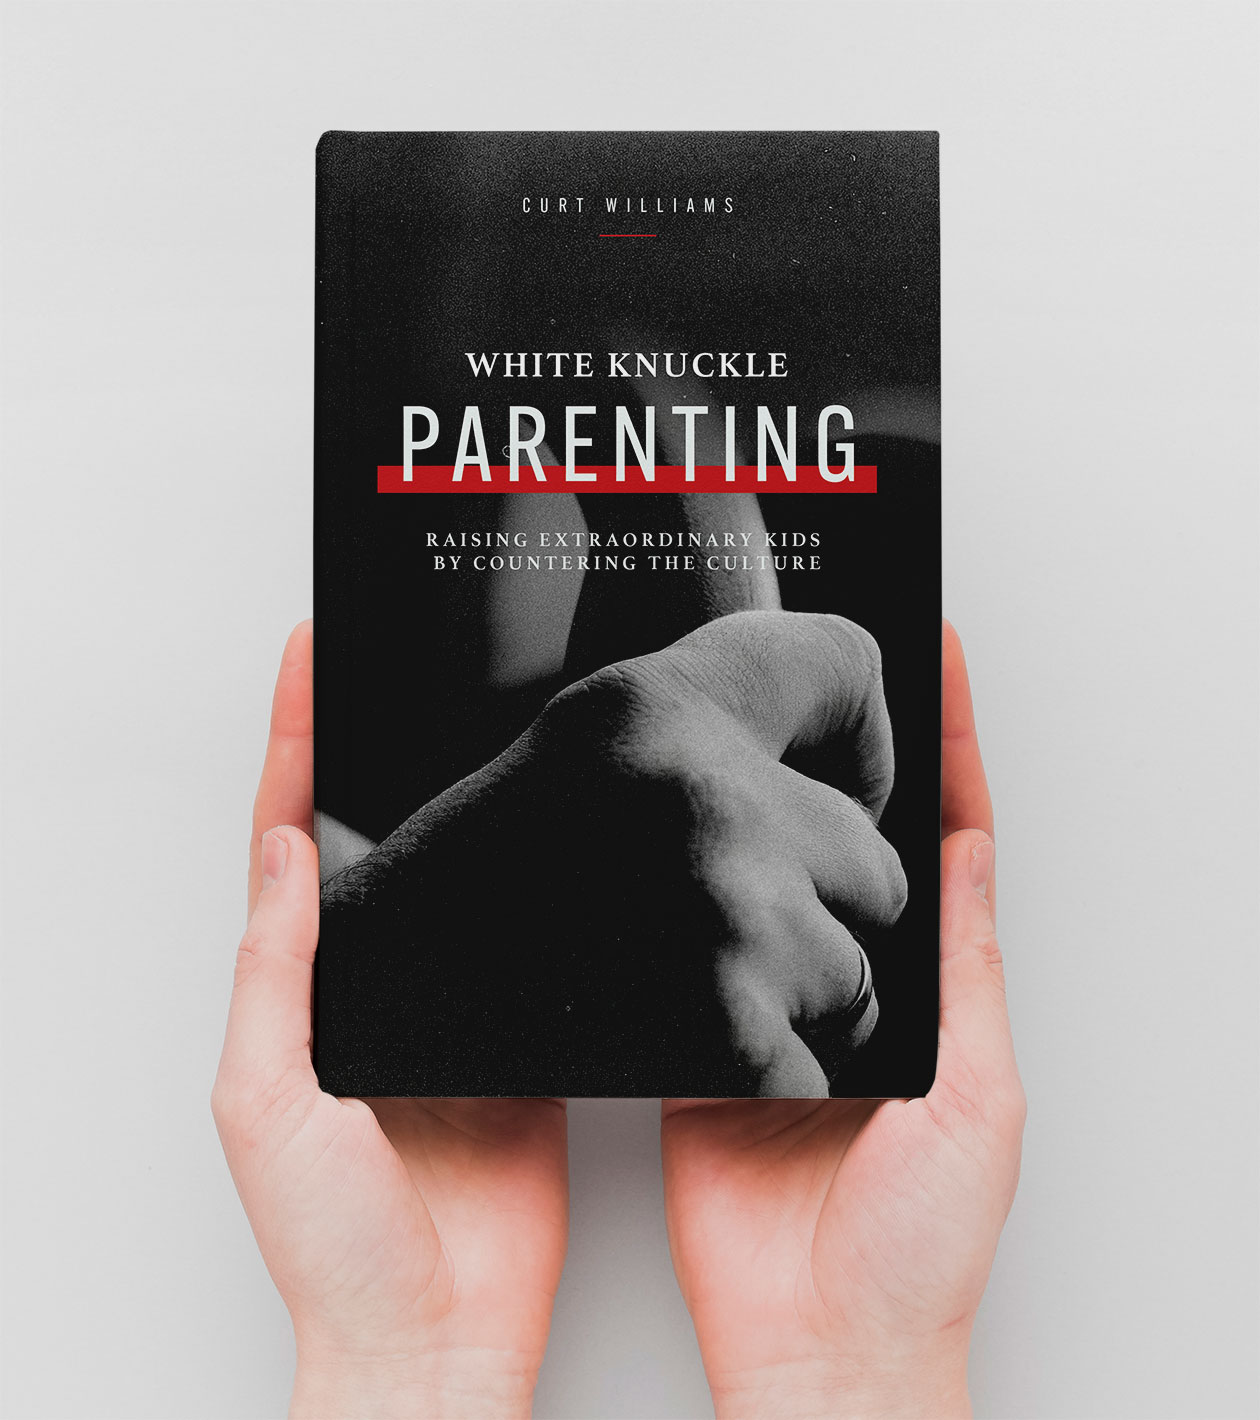 White Knuckle Parenting: Raising Extraordinary Kids by Countering the Culture by Curt Williams